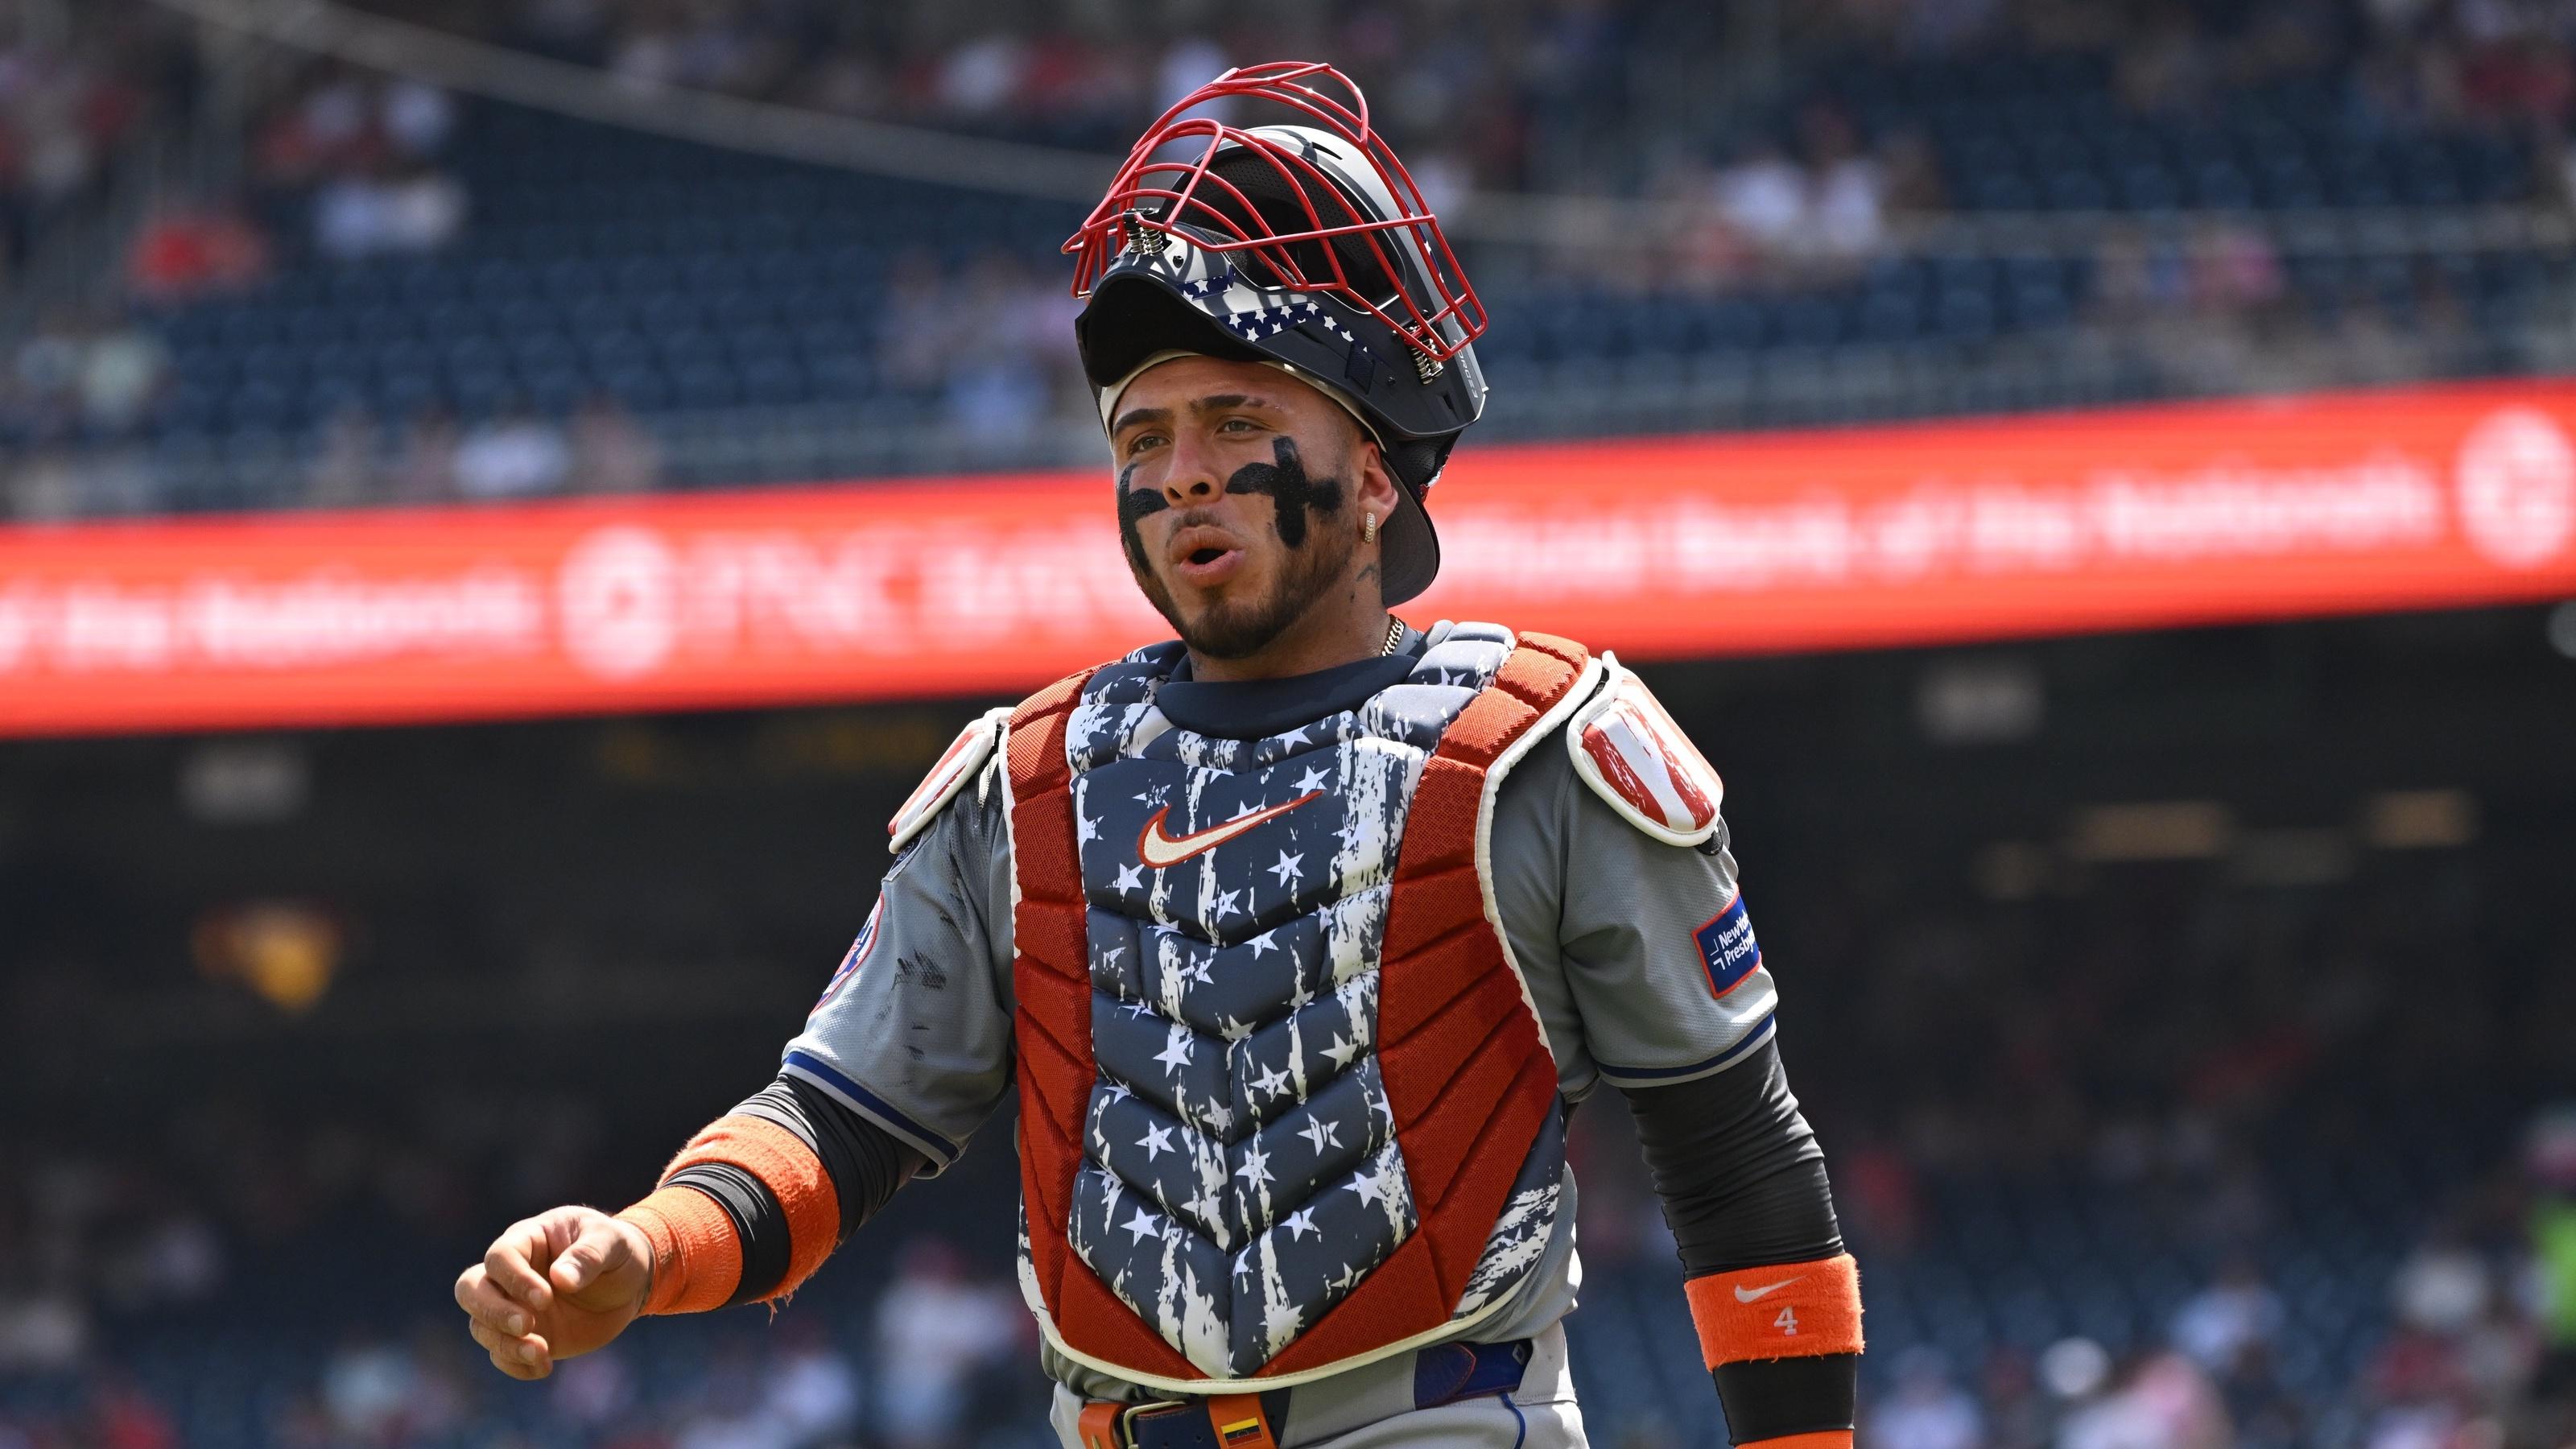 New York Mets catcher Francisco Alvarez (4) wears a 4th of July themed catchers kit against the Washington Nationals during the first inning at Nationals Park.